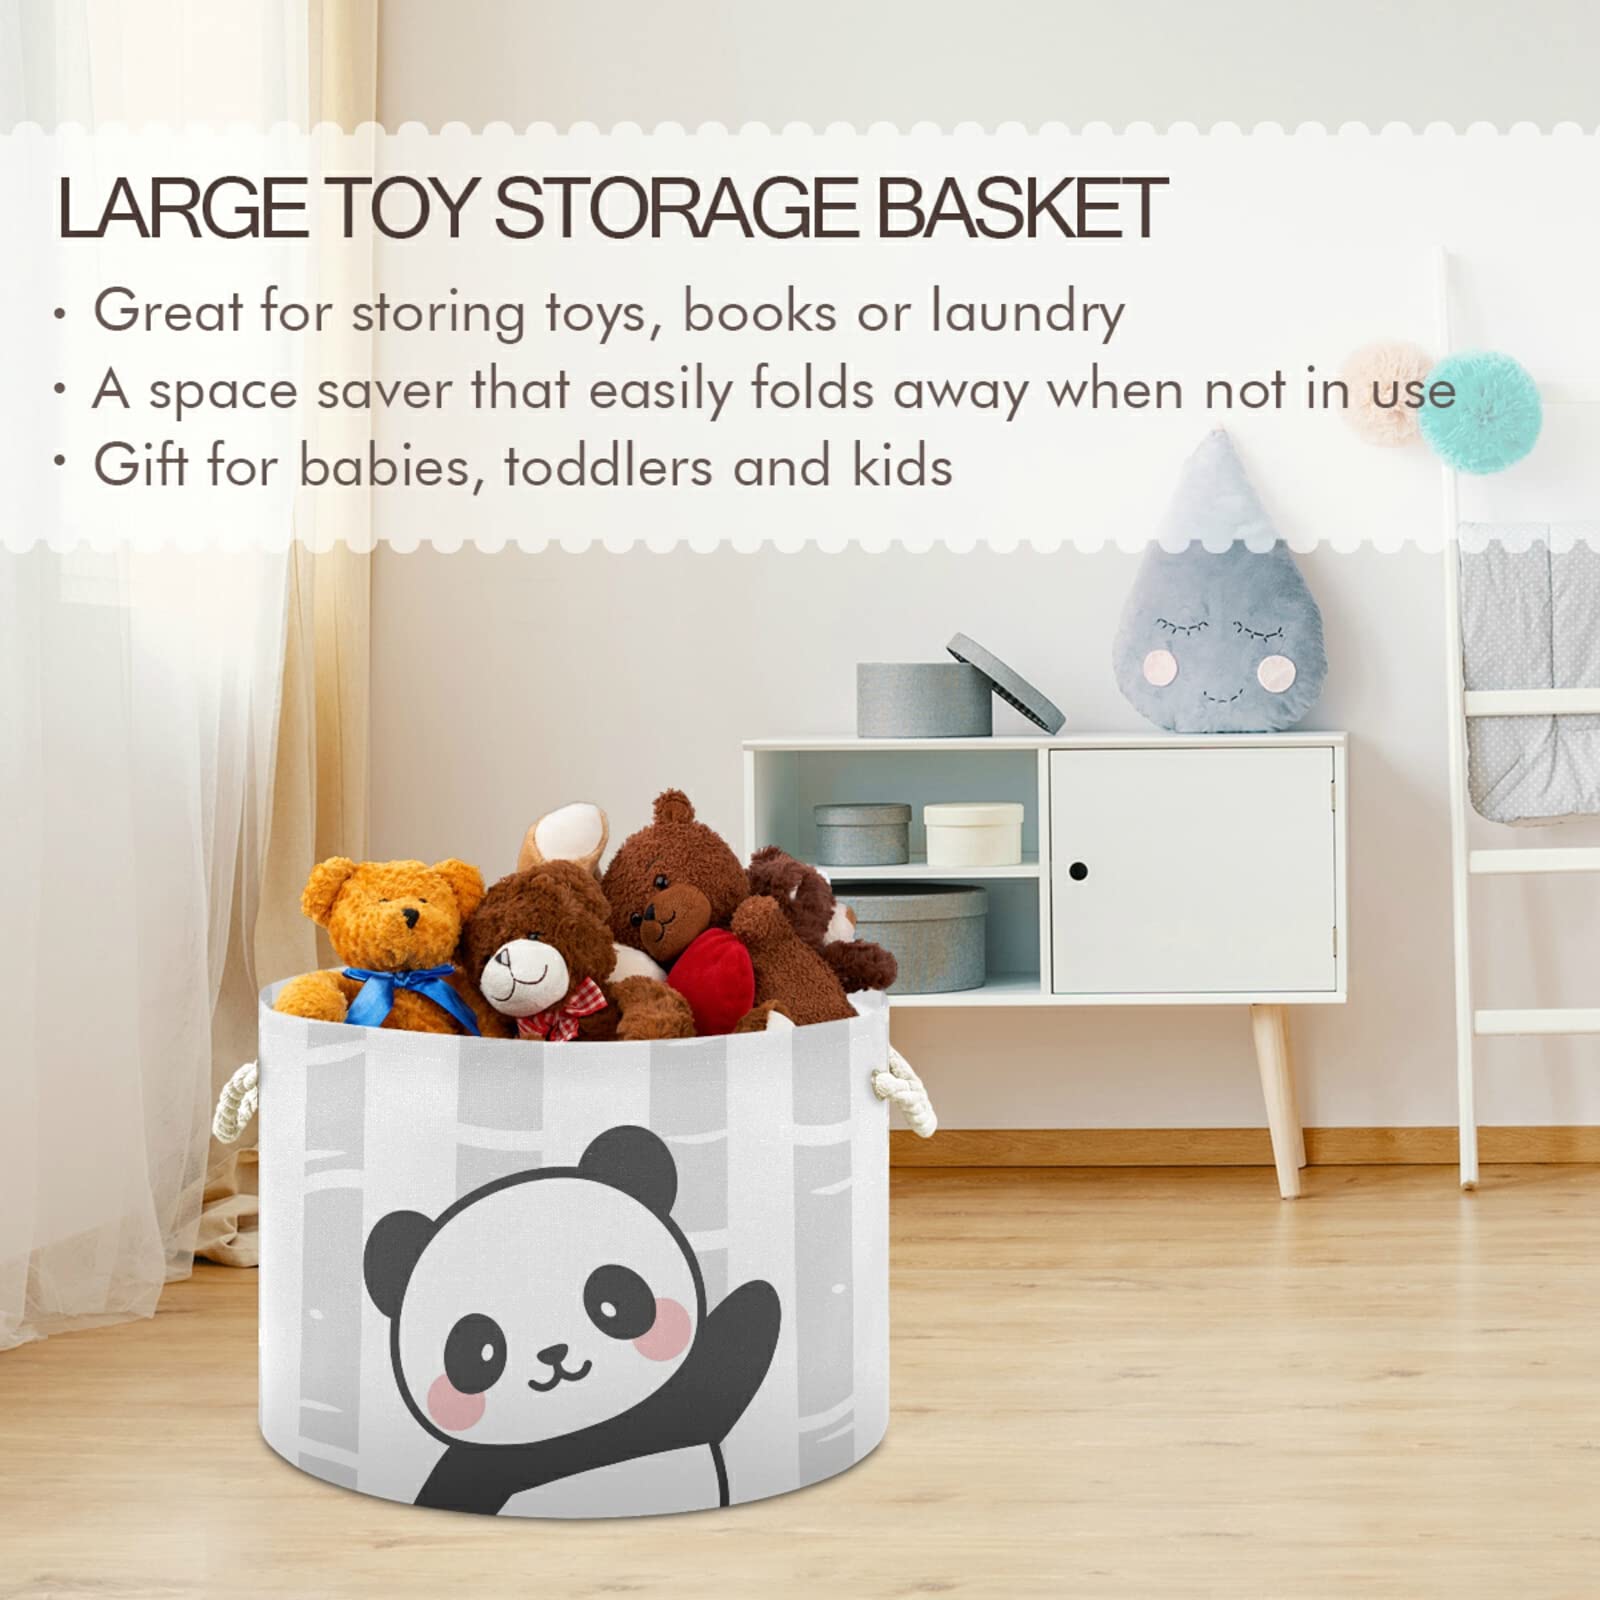 ALAZA Hello Panda Baby Shower Cute Animal Storage Basket Gift Baskets Large Collapsible Laundry Hamper with Handle, 20x20x14 in